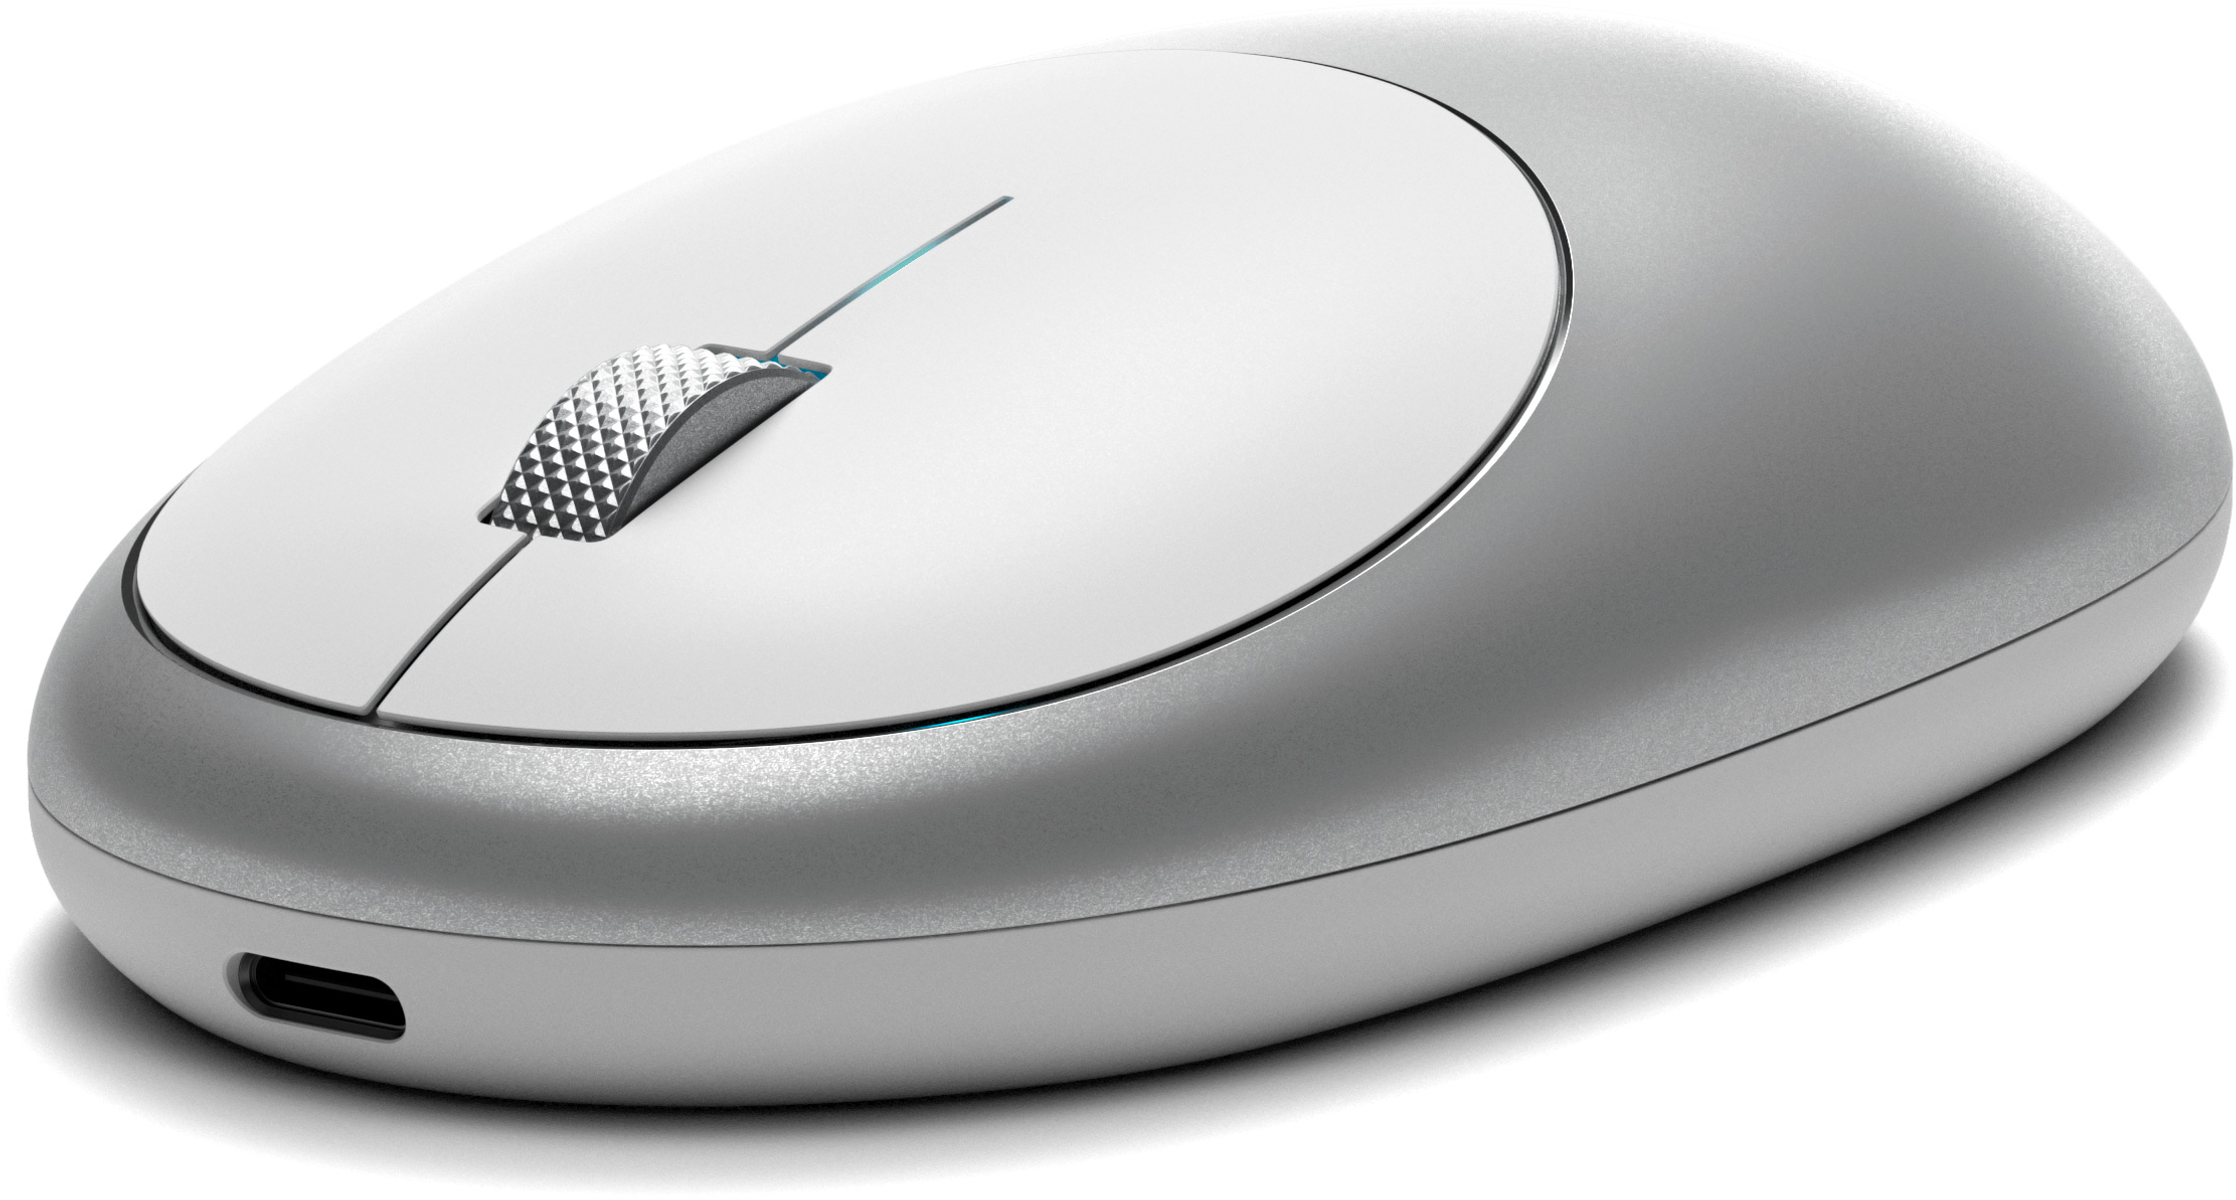 SATECHI M1 Bluetooth Wireless Mouse - Silber Silver Maus